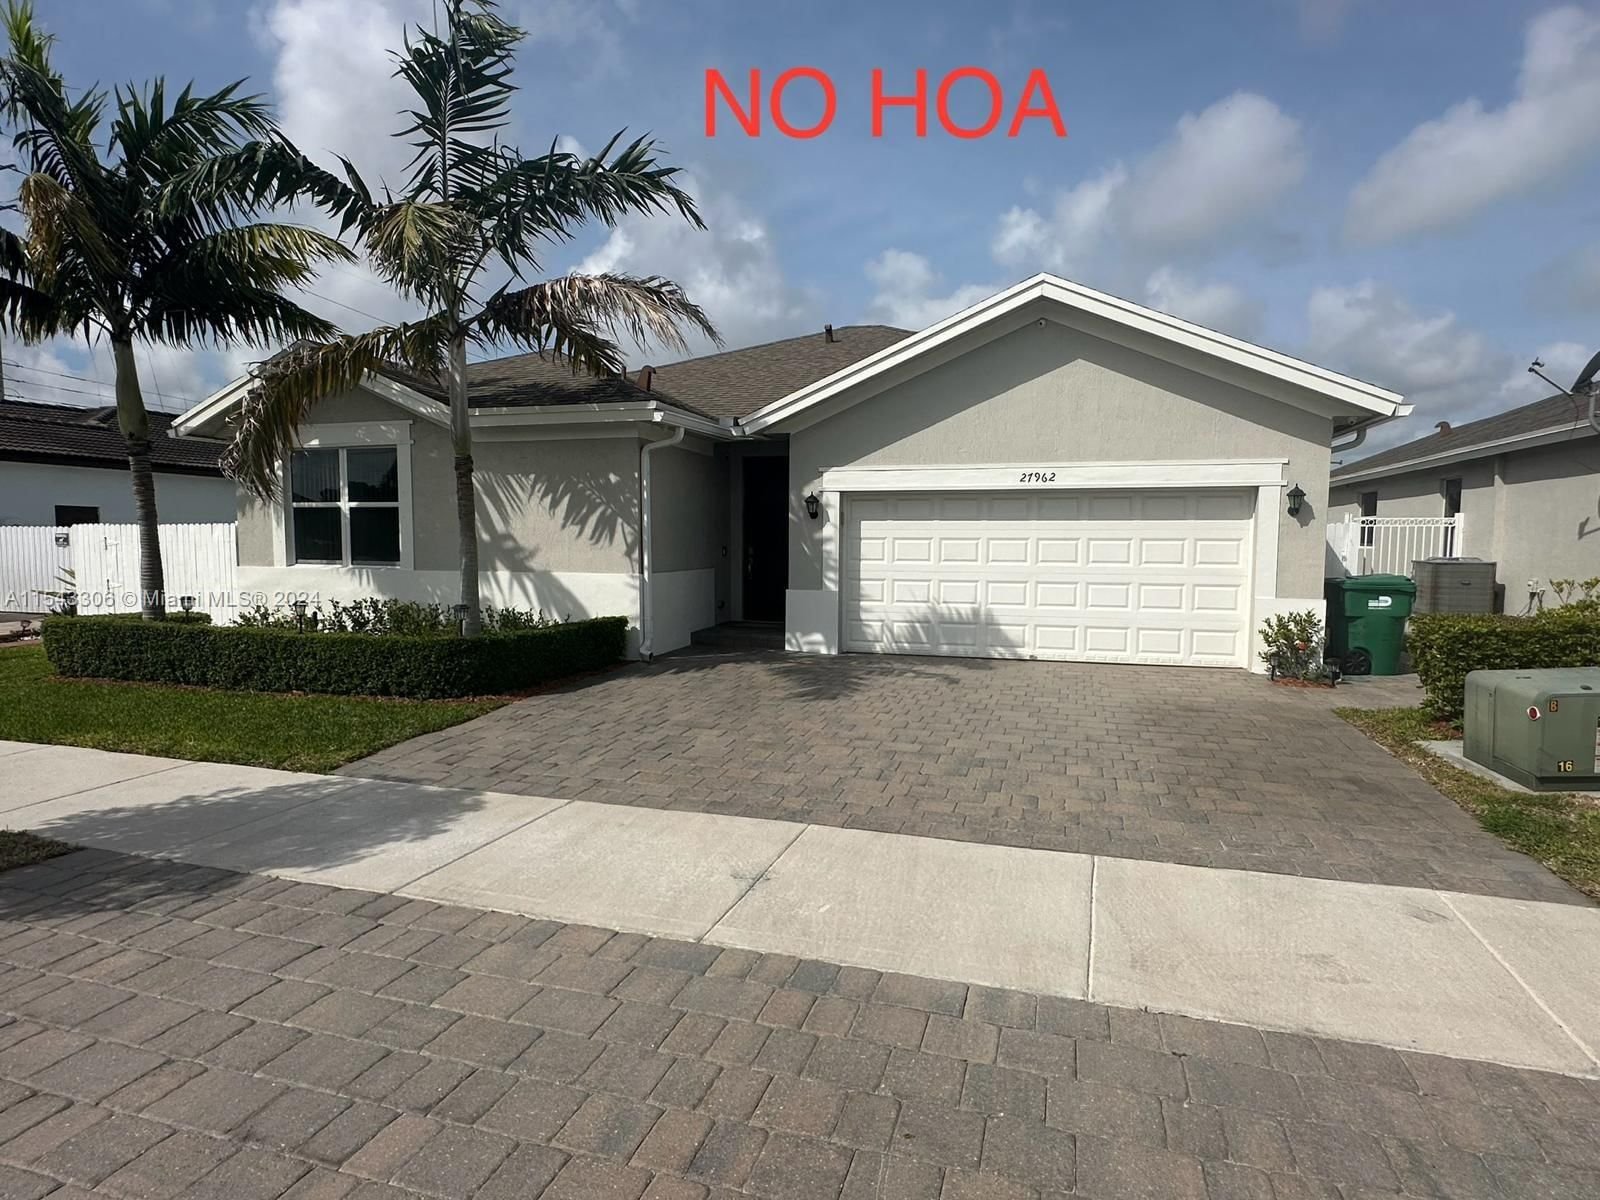 Real estate property located at 27962 134th Ct, Miami-Dade County, A.H. AT TURNPIKE SOUTH FI, Homestead, FL